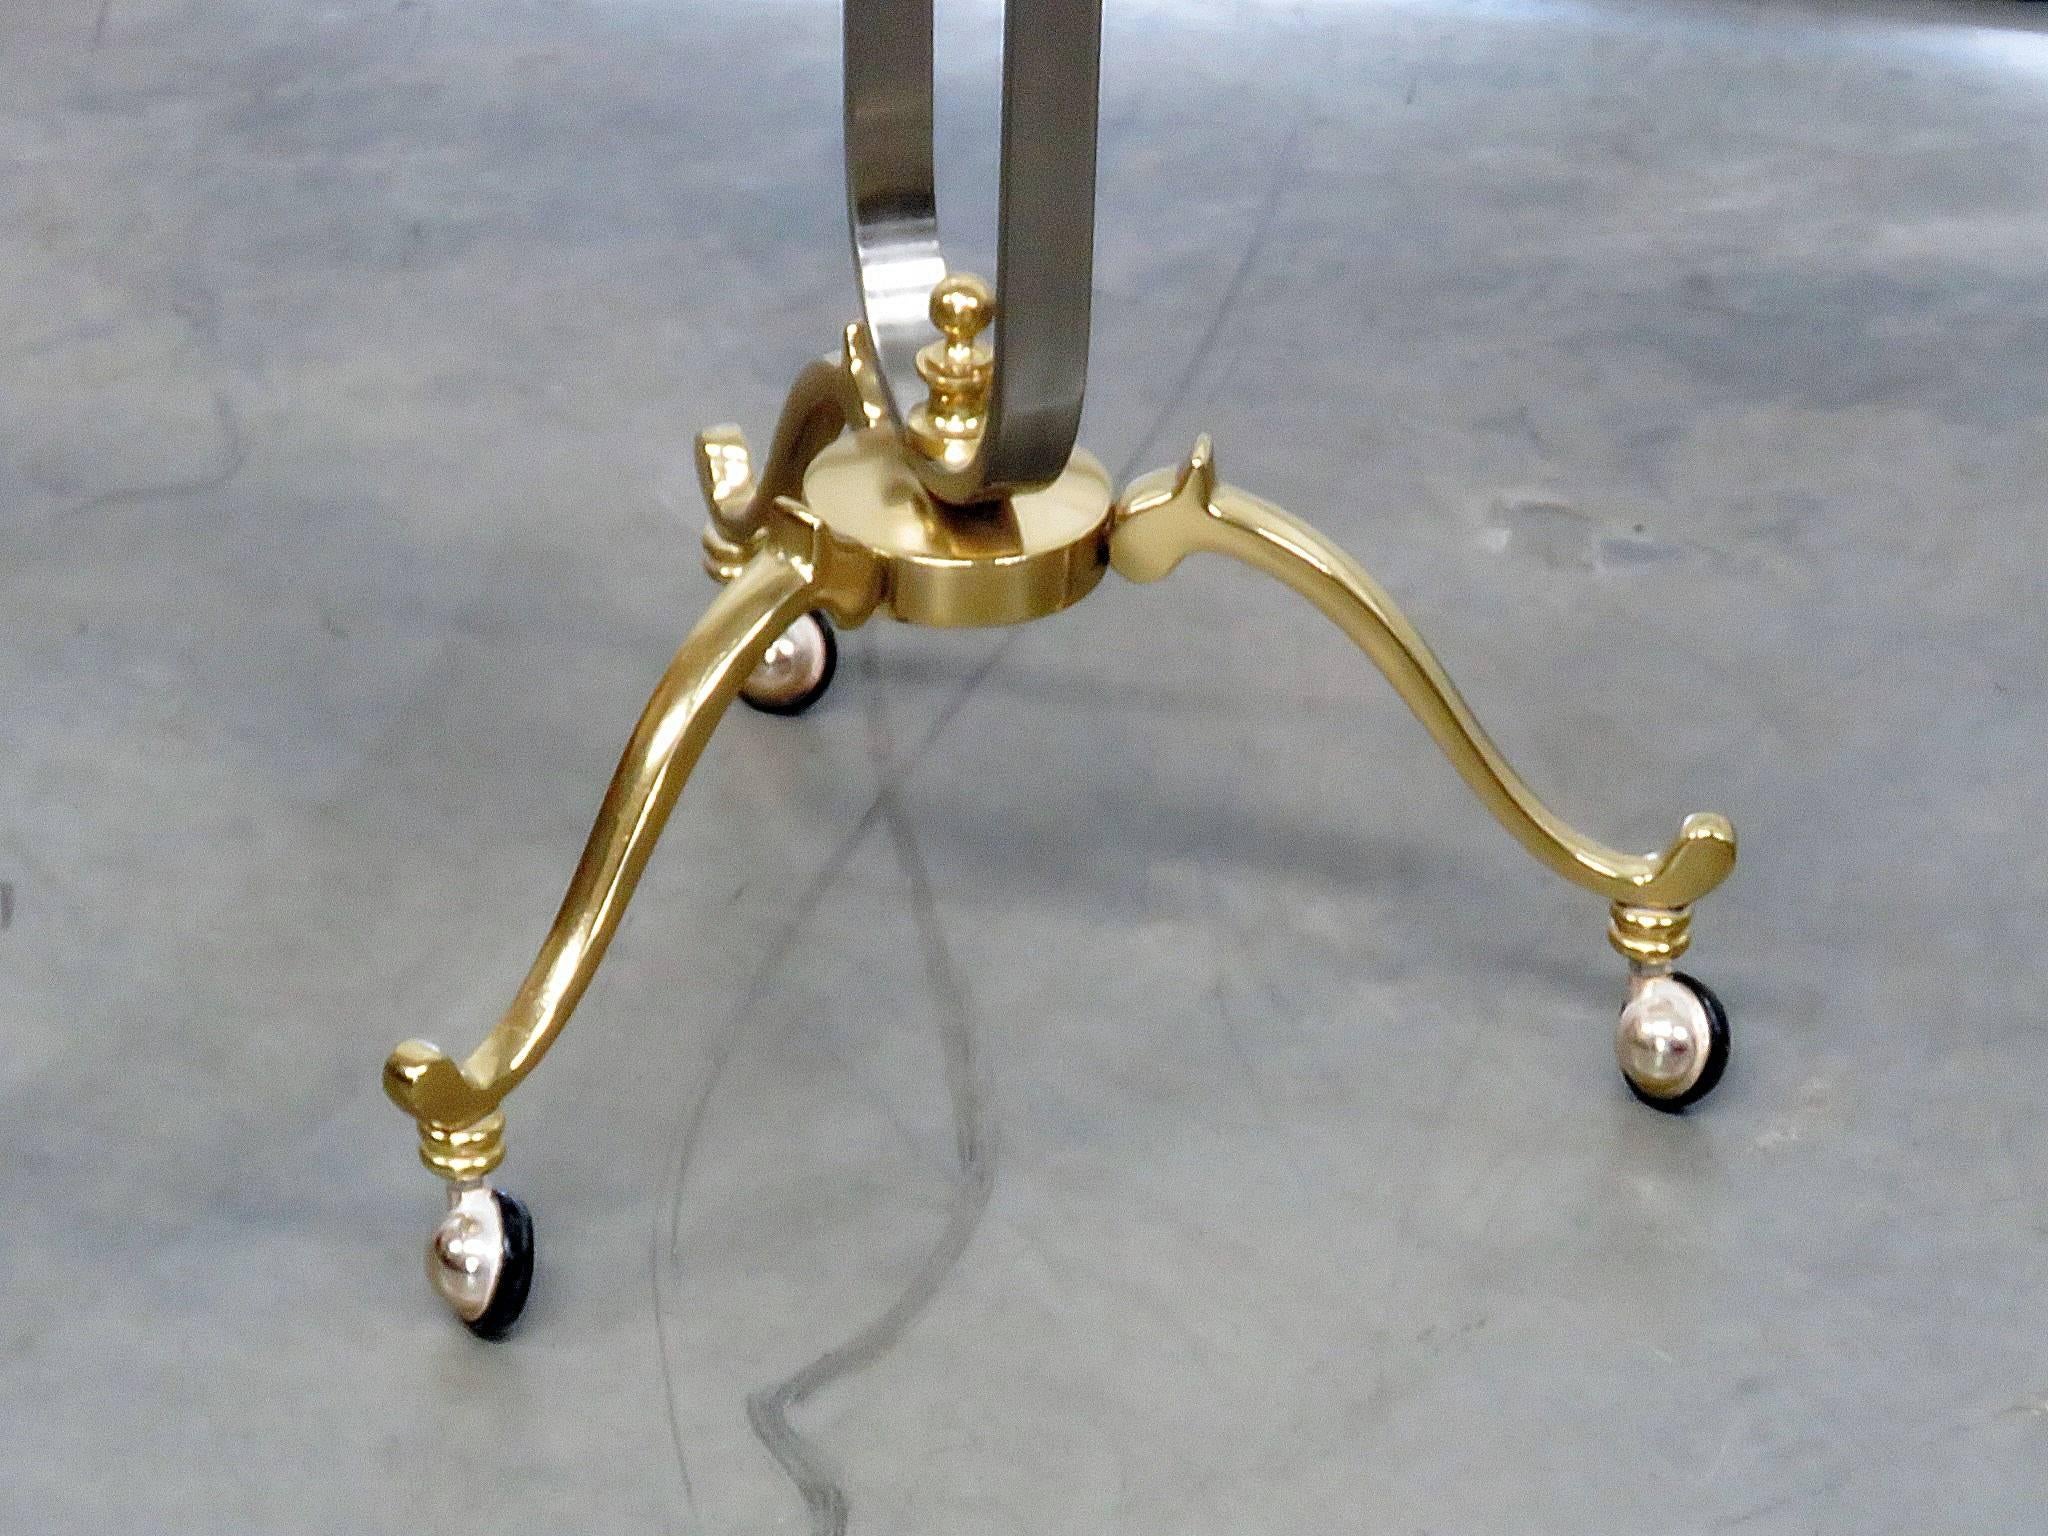 A Maison Jansen valet influenced by neoclassical themes with ram's head motif and produced in midcentury Italy. Consists of polished steel and accented in brass. The valet stands on tripod scroll form feet on casters, features a coin tray with